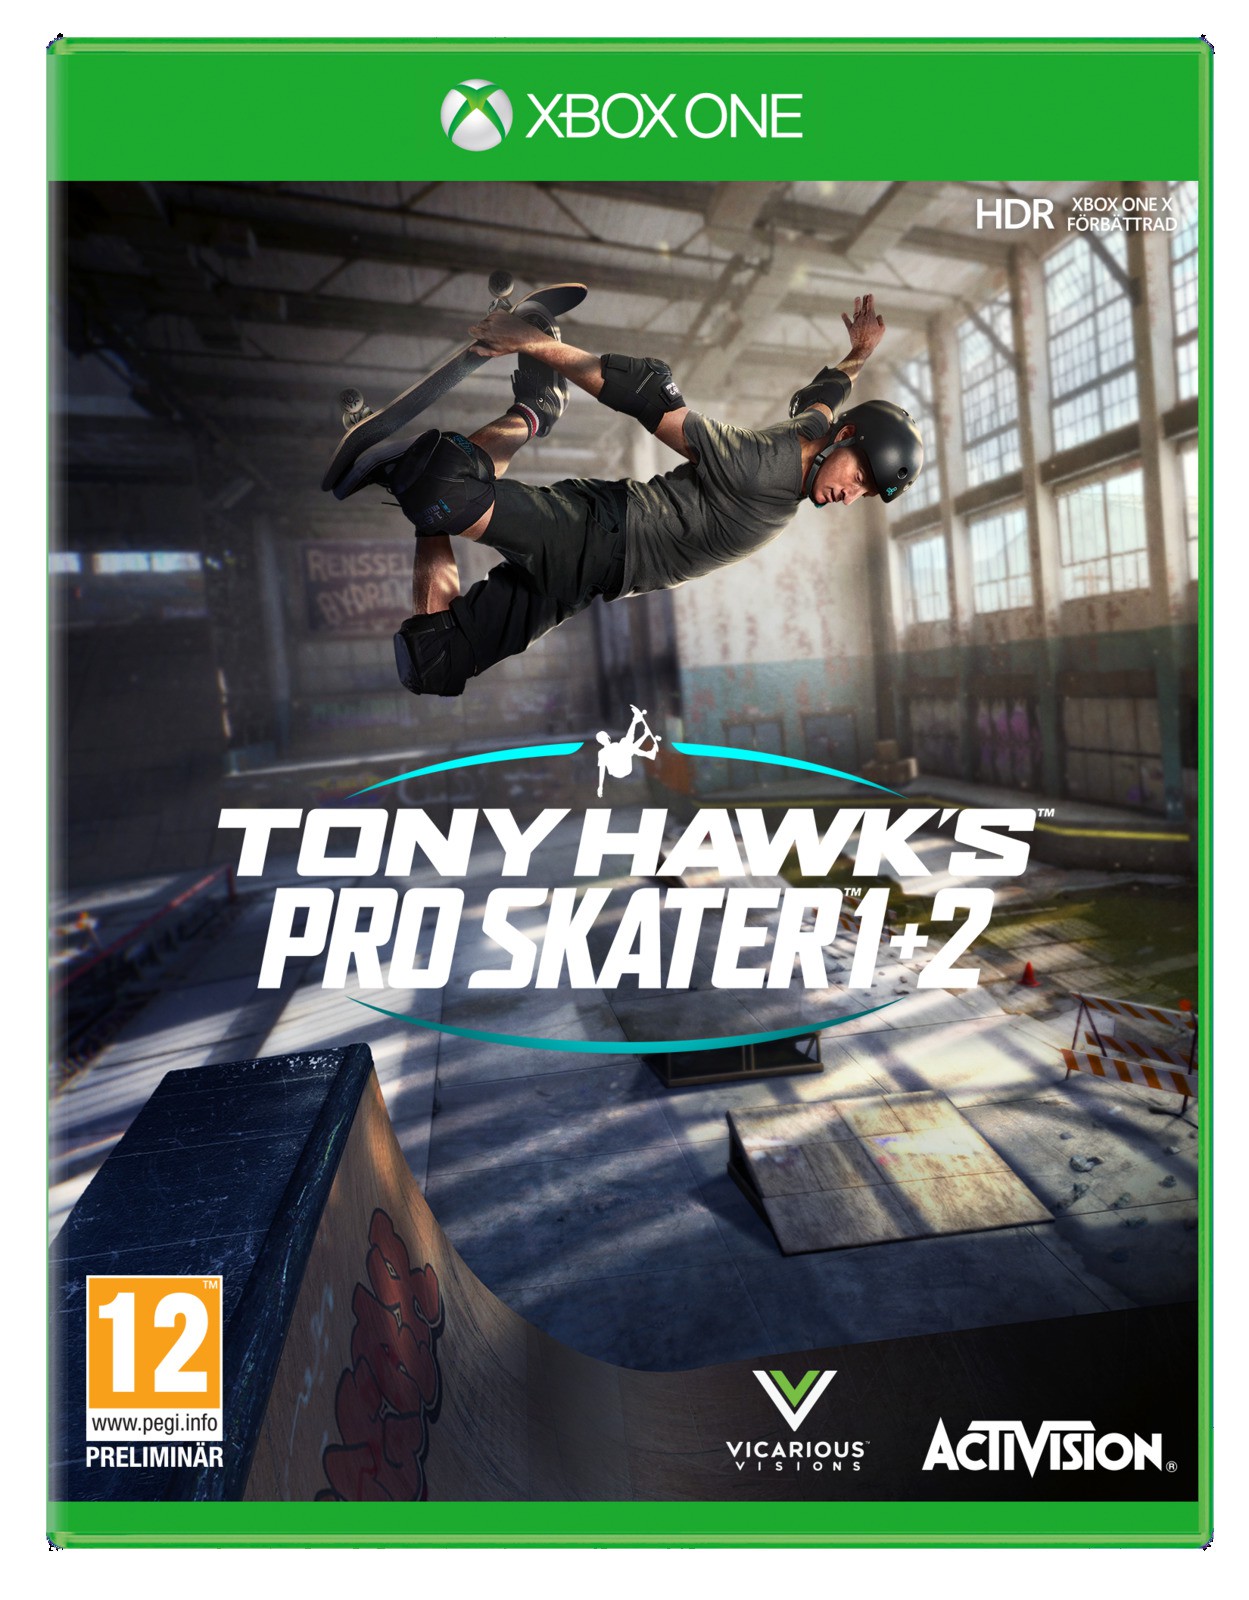 Tony Hawk's Pro Skater 1+2 Collector's Edition